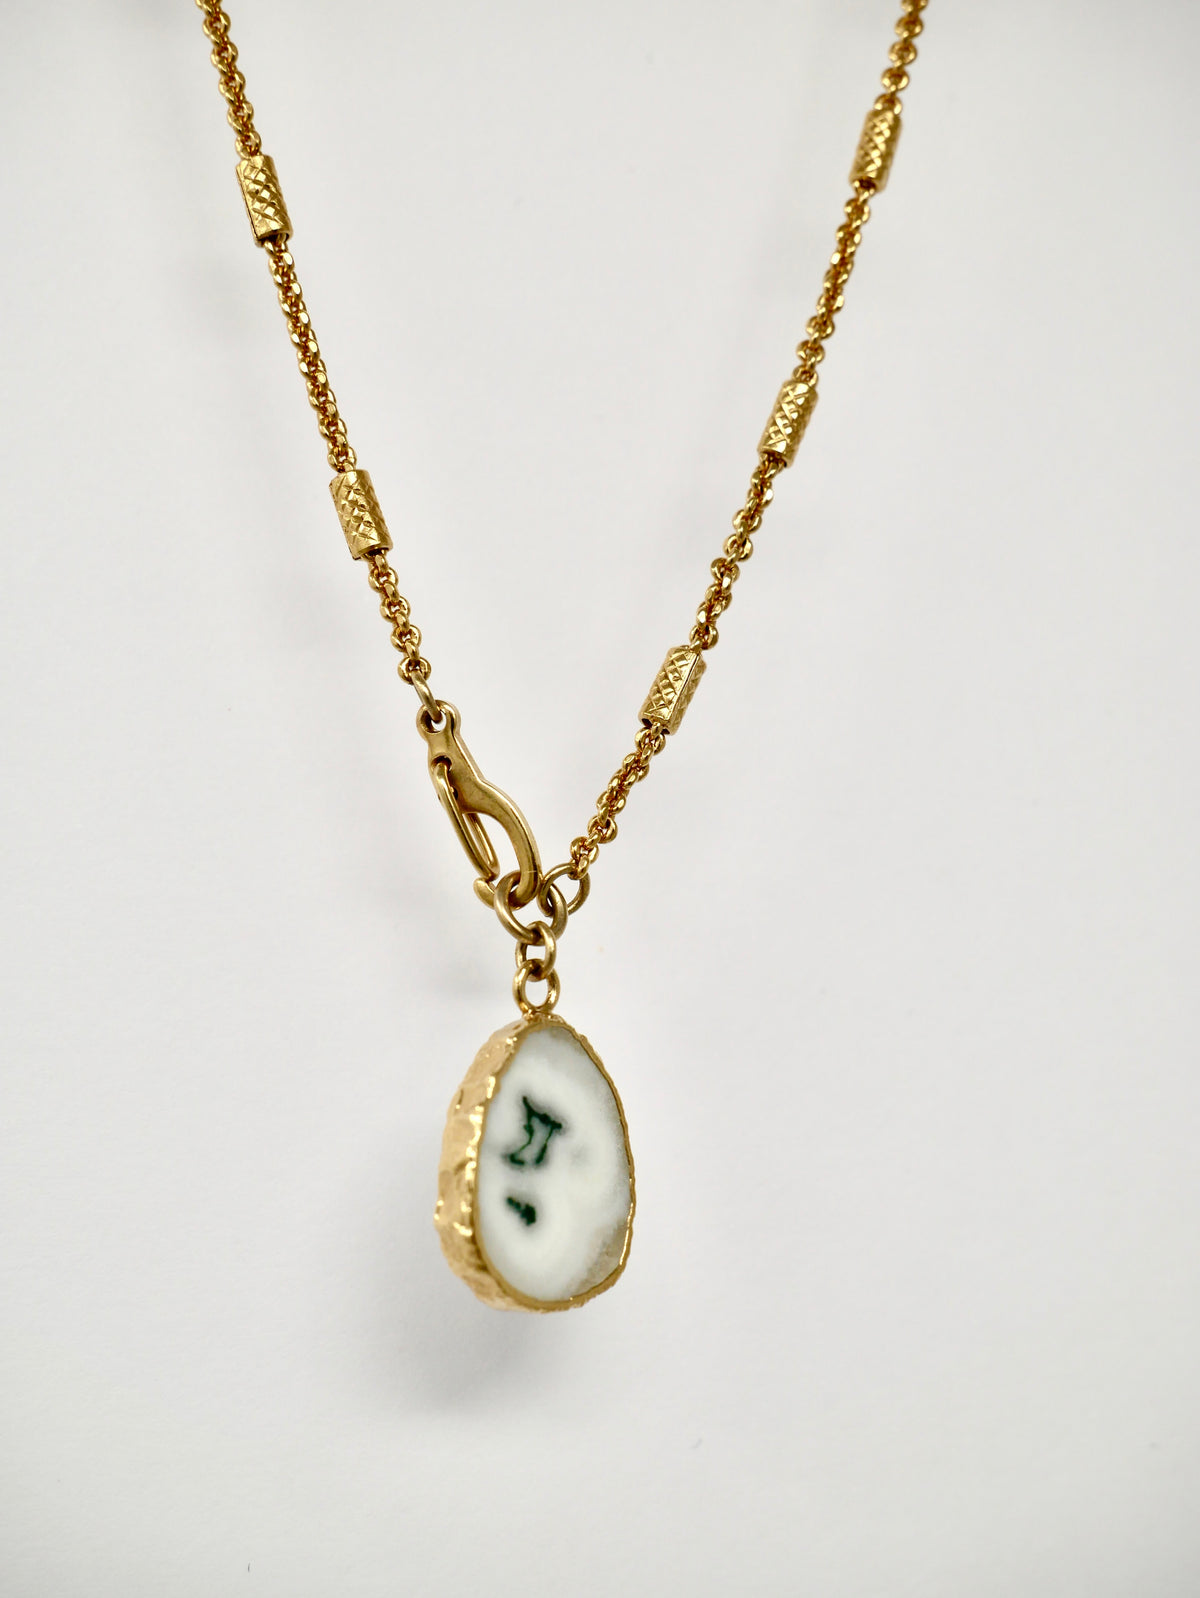 Golden Necklace - Moss Agate